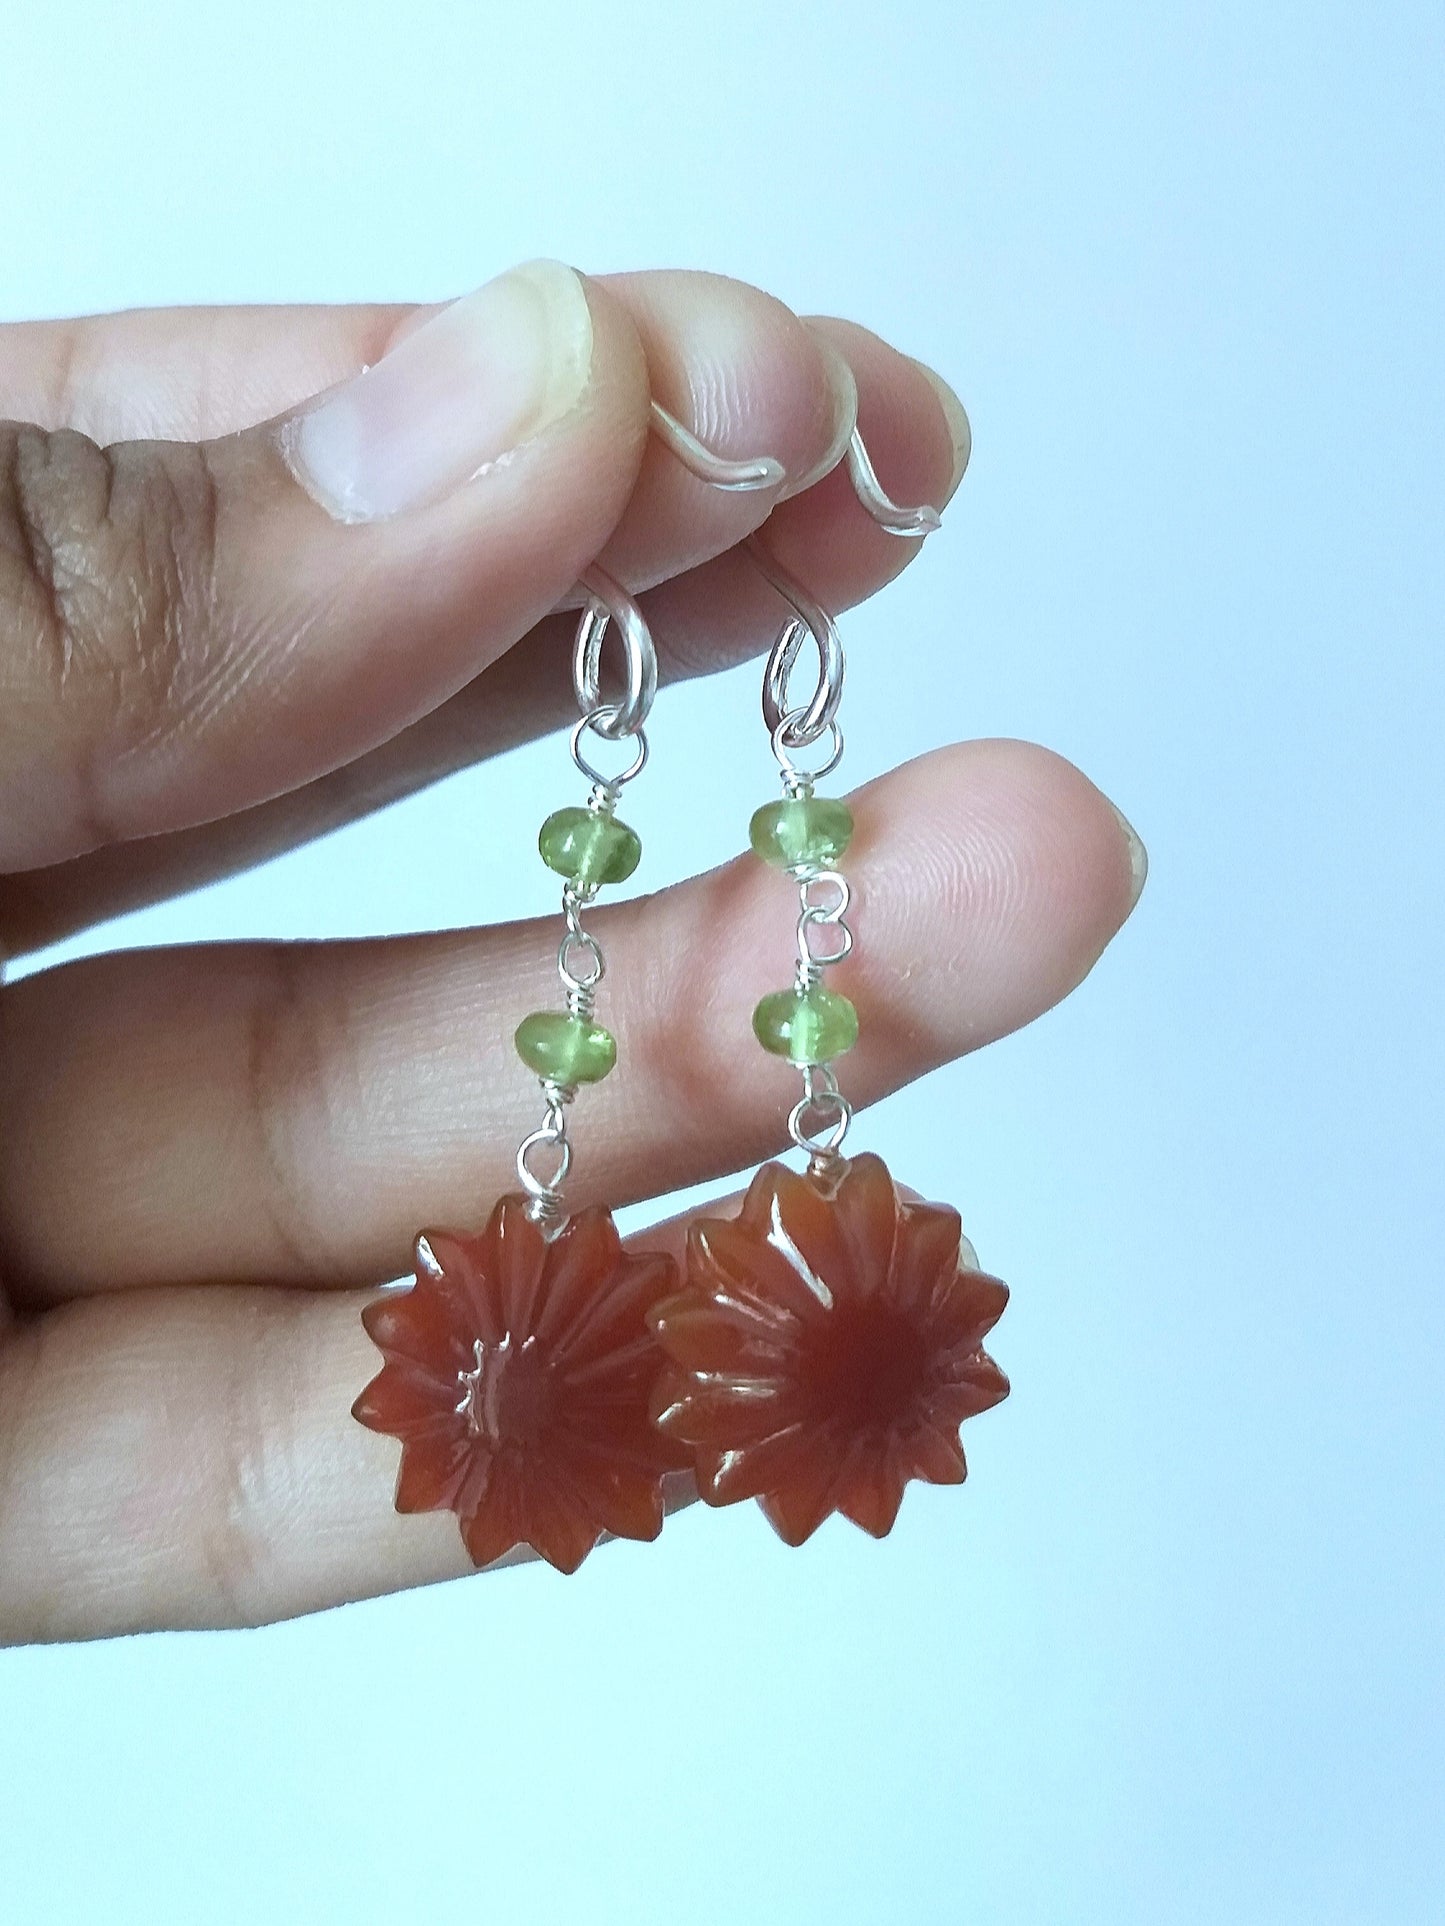 Natural Onyx Carving and Peridot Beads Earrings, August Birthstone Jewelry